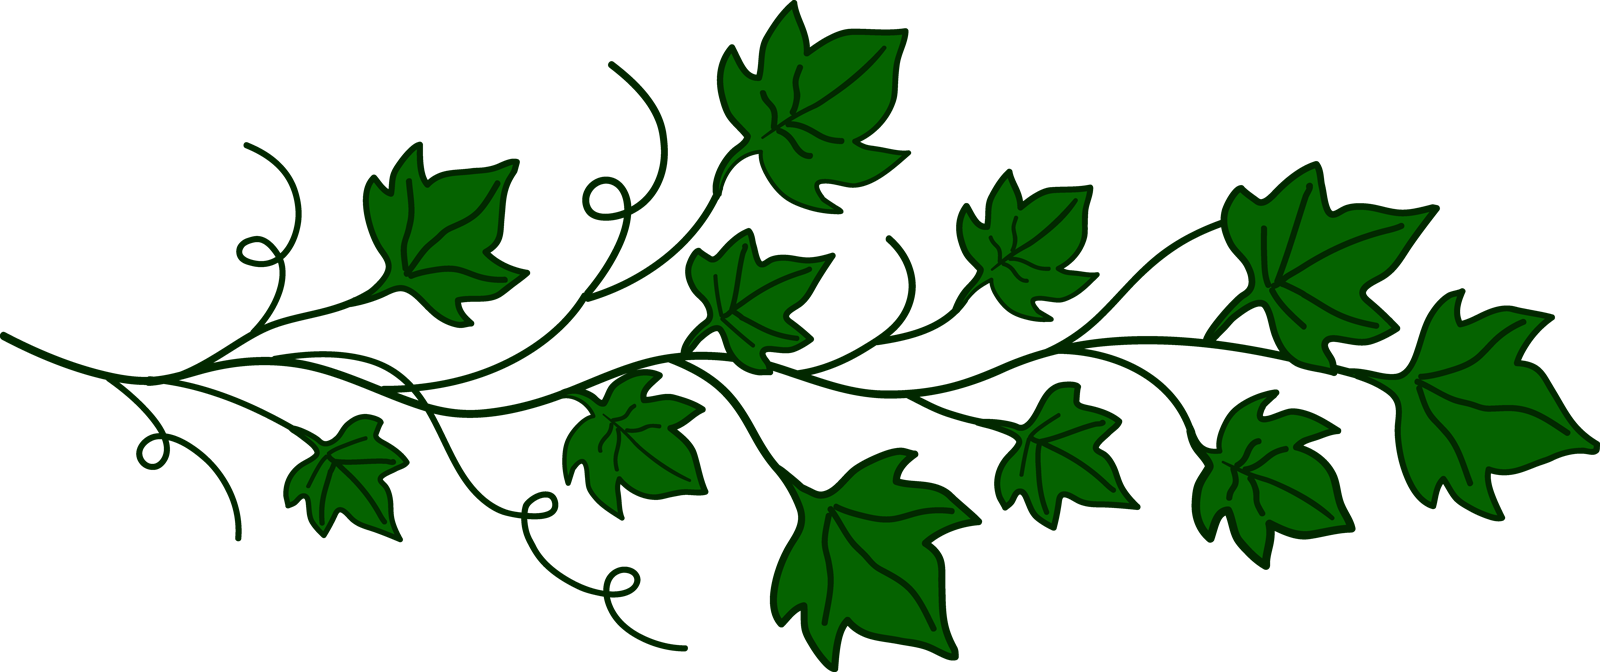 Vines png pictures free. Leaves clipart transparent background